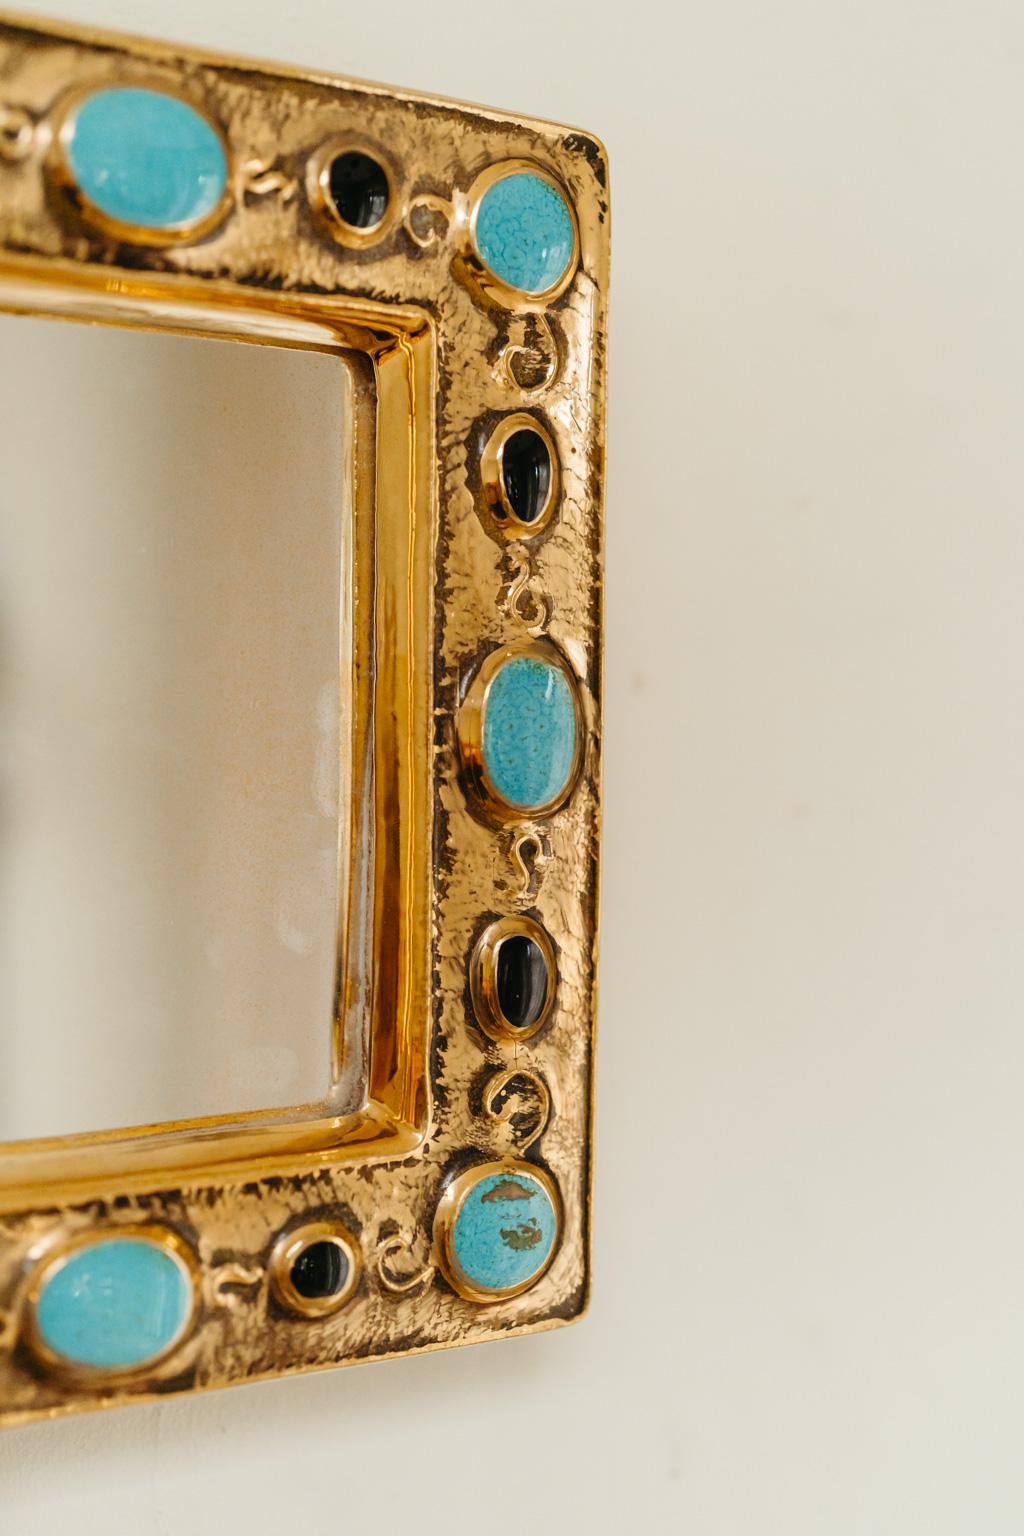 20th Century François Lembo mirror, ceramic, gold and black, turquoise, jeweled,  signed.  For Sale